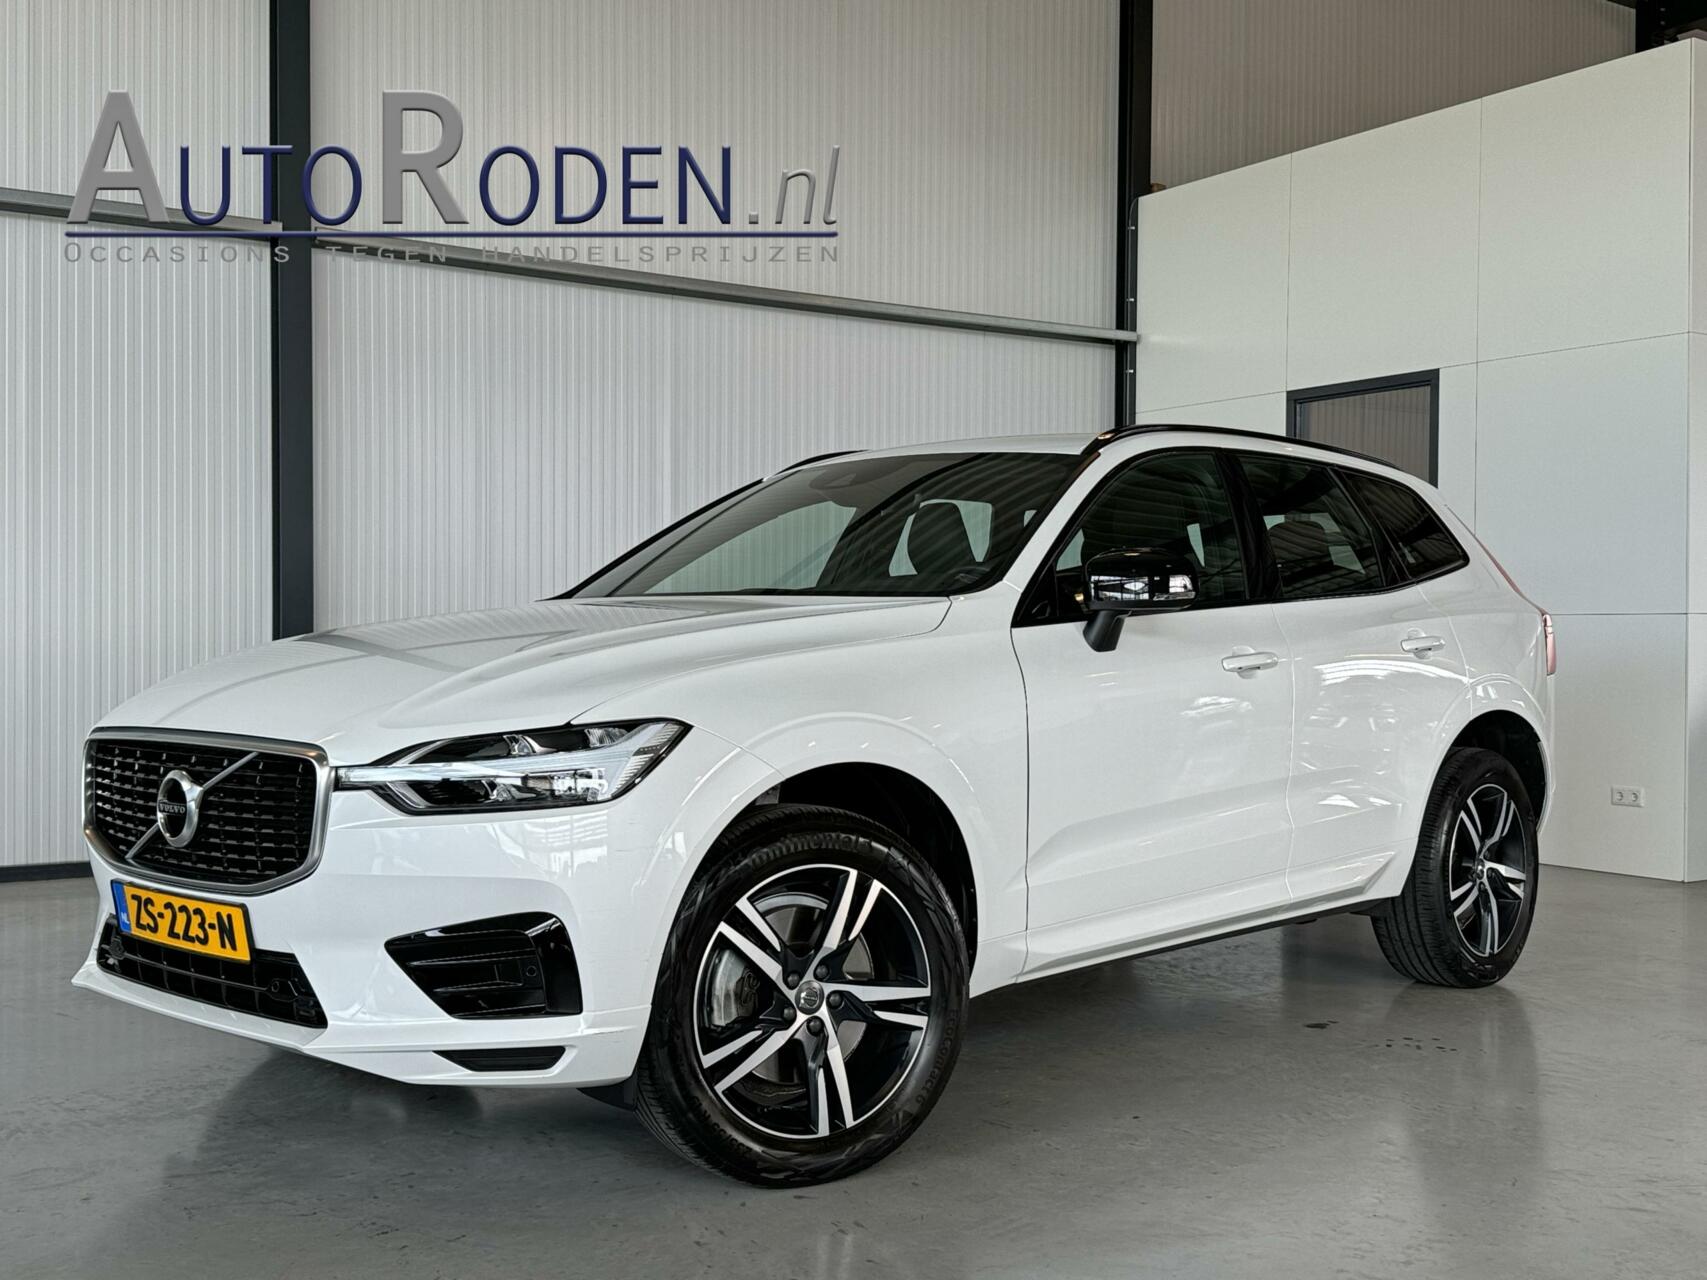 Volvo XC60 2.0 T5 184Kw AWD R-Design Geartronic Inscription Plus|Luchtvering